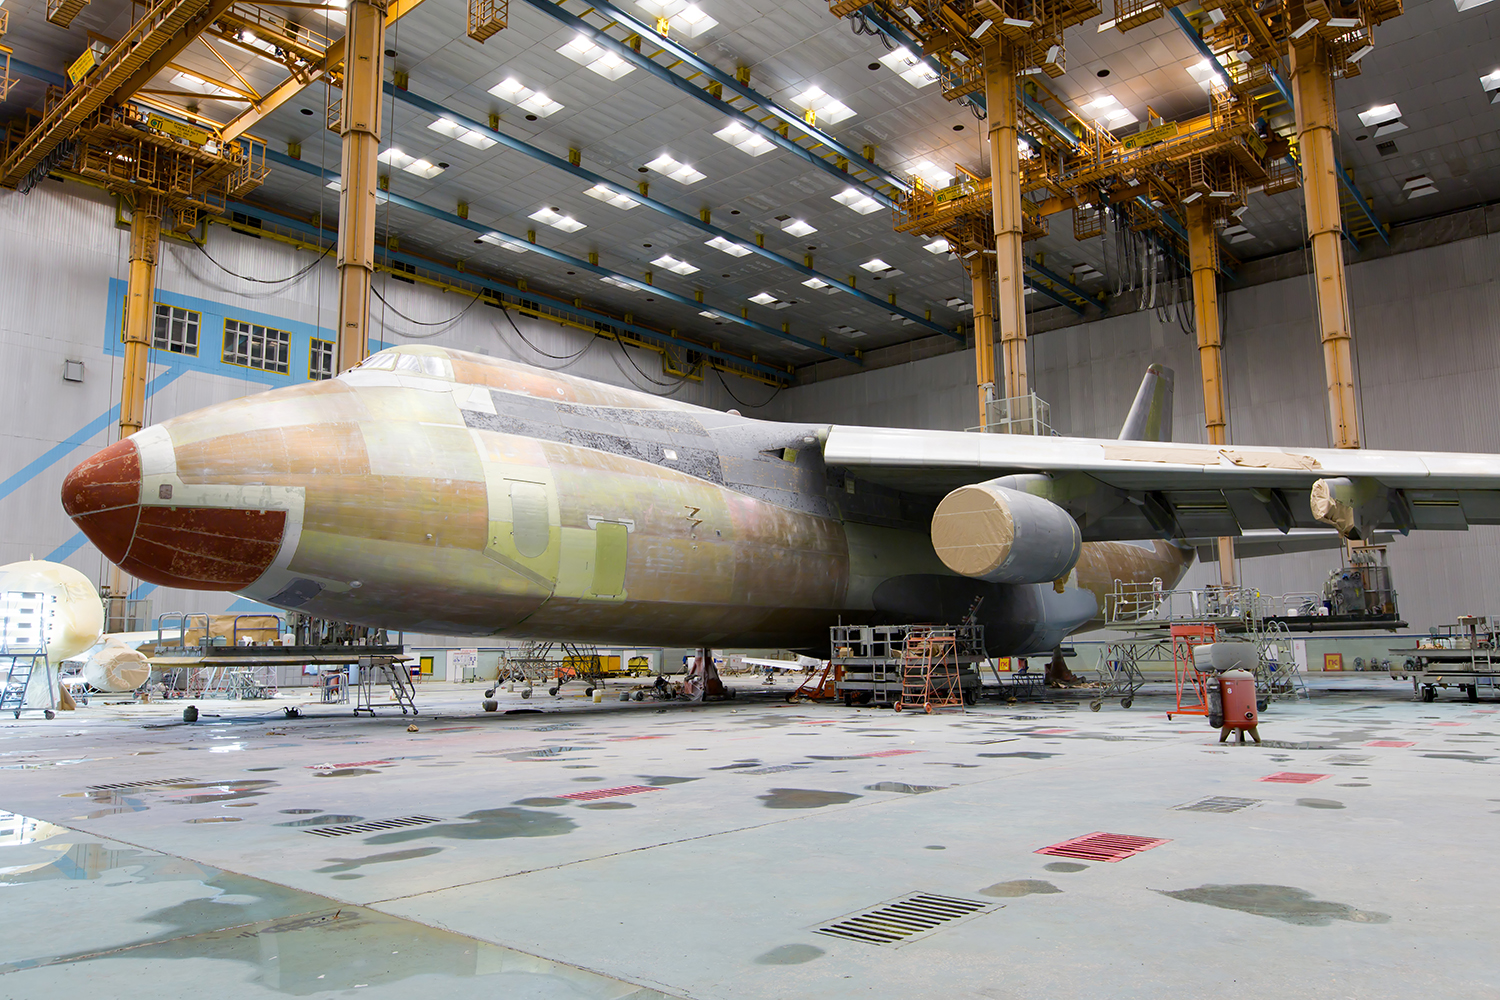 an aircraft undergoes painting and maintenance